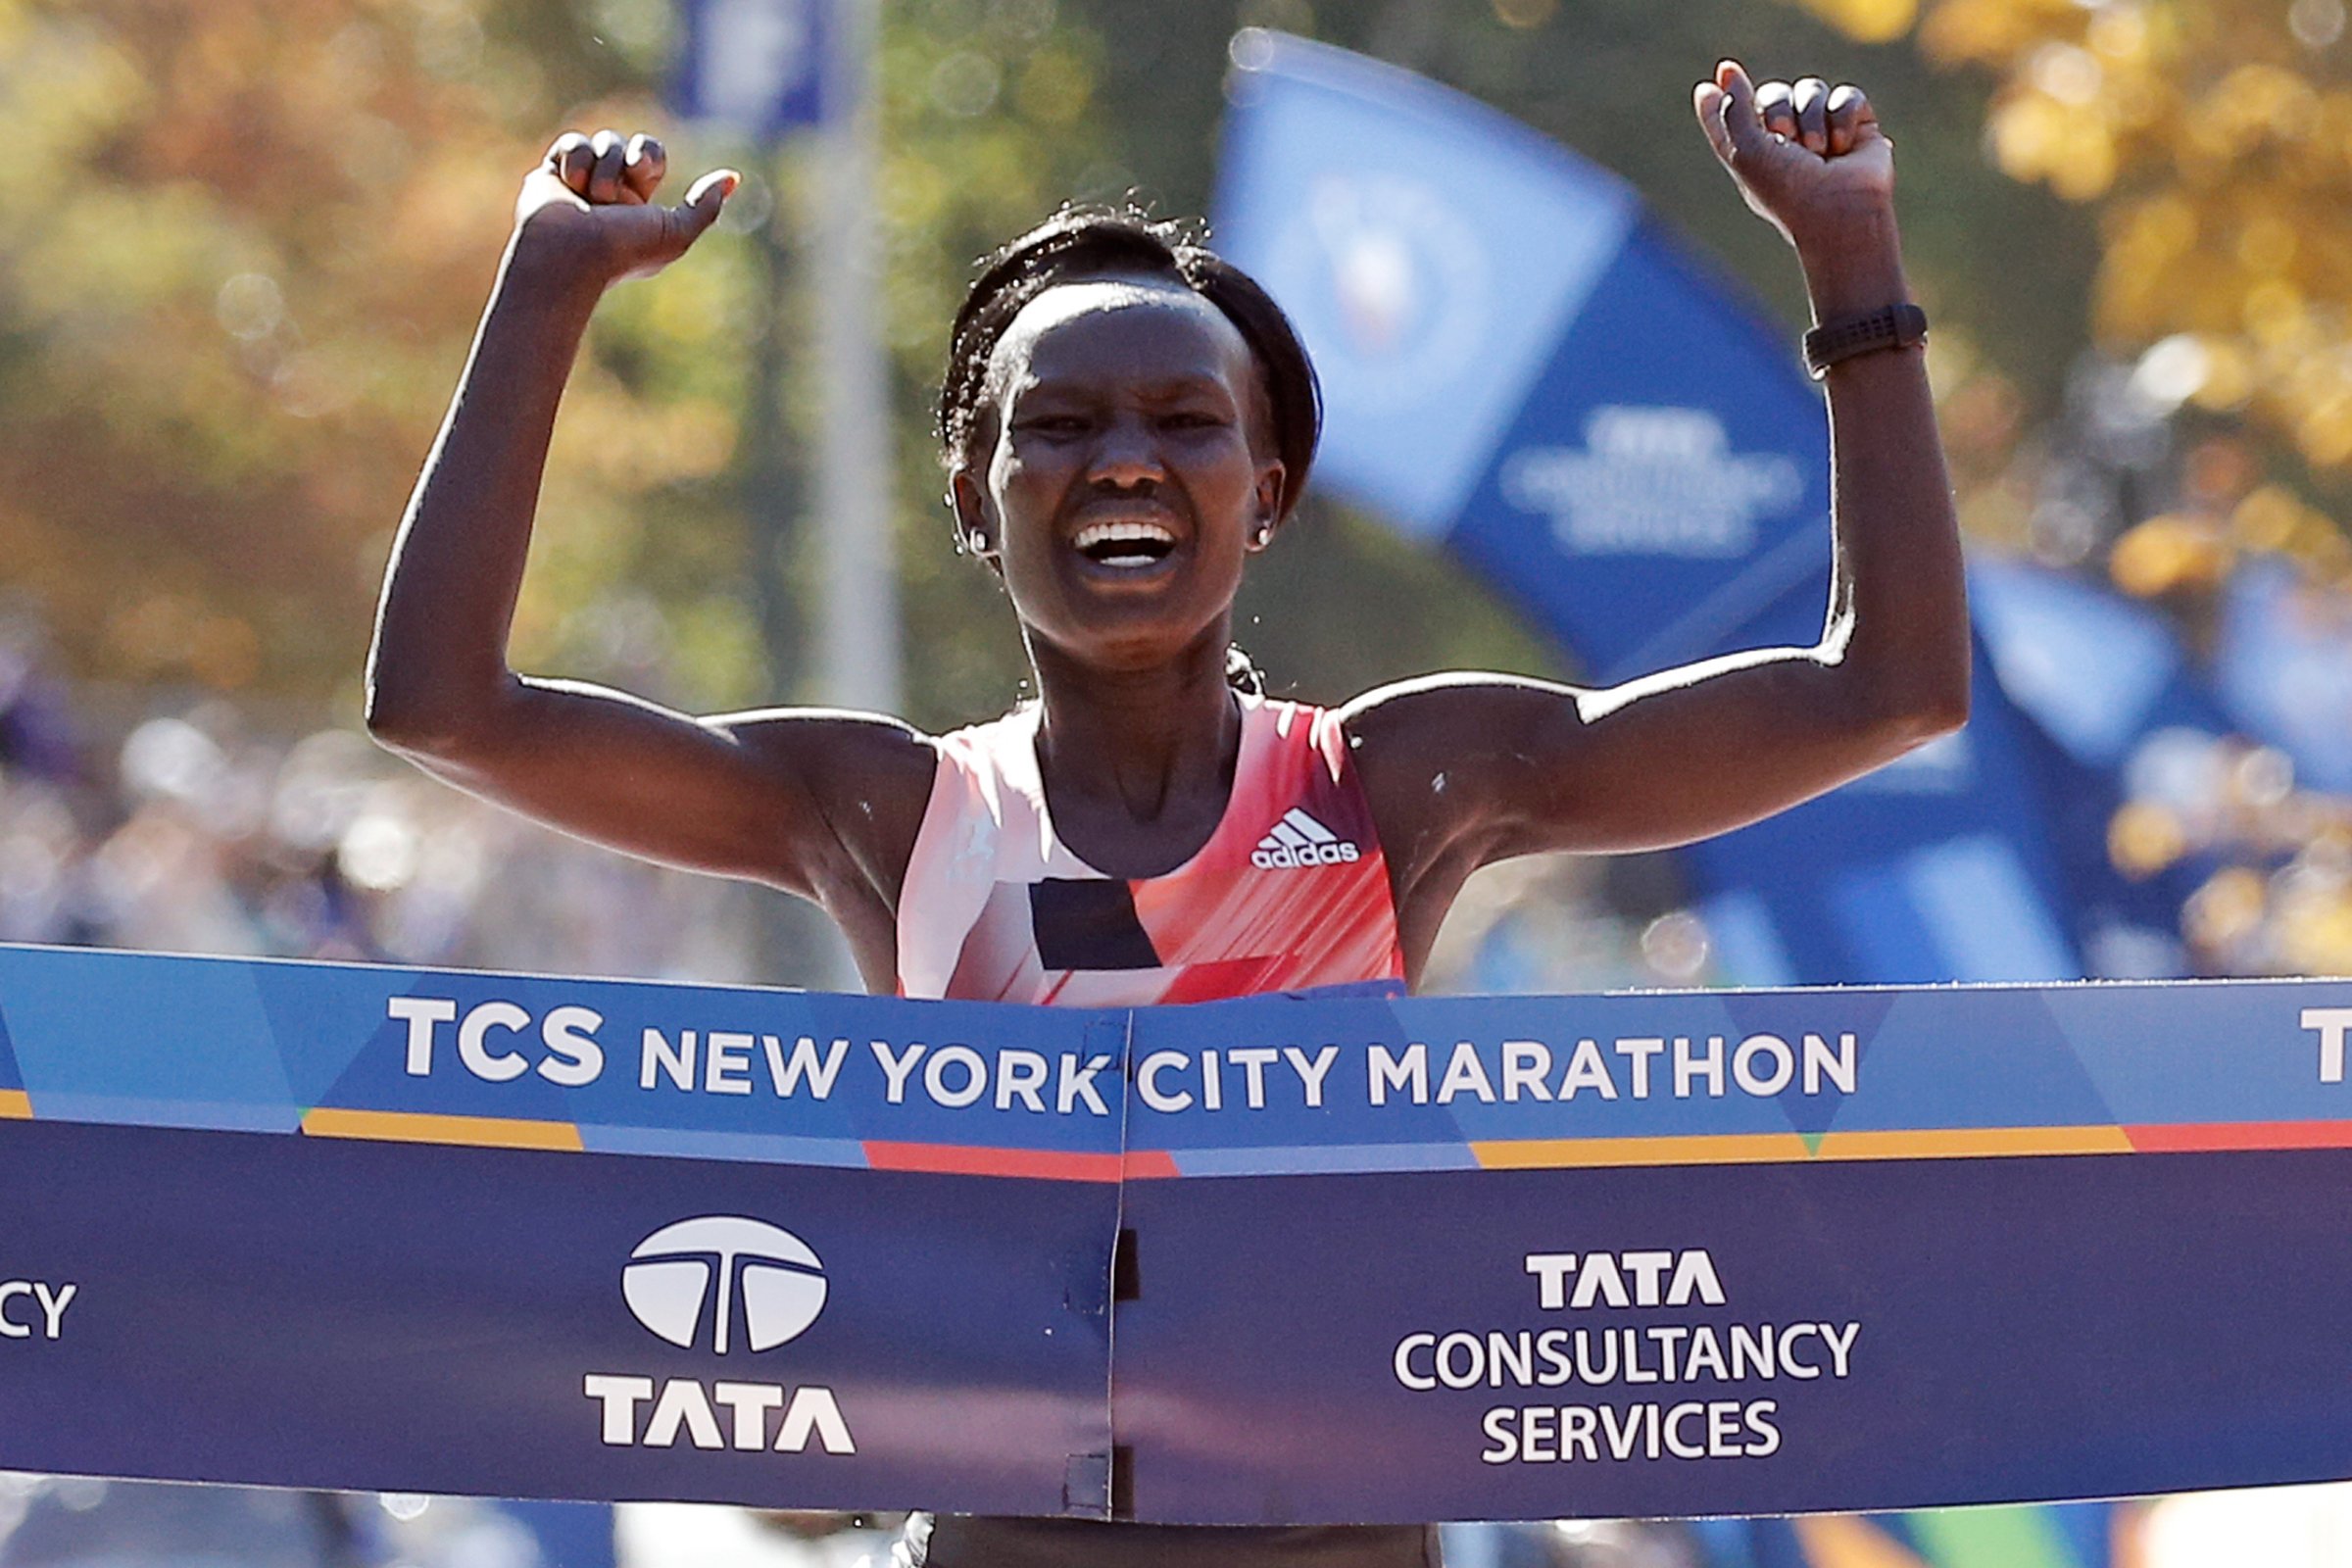 Mary Keitany of Kenya crosses the finish line to win the womens field of the 2016 New York City Marathon in Central Park in the Manhattan borough of New York City, New York, U.S. November 6, 2016. REUTERS/Mike Segar - RTX2S6K8